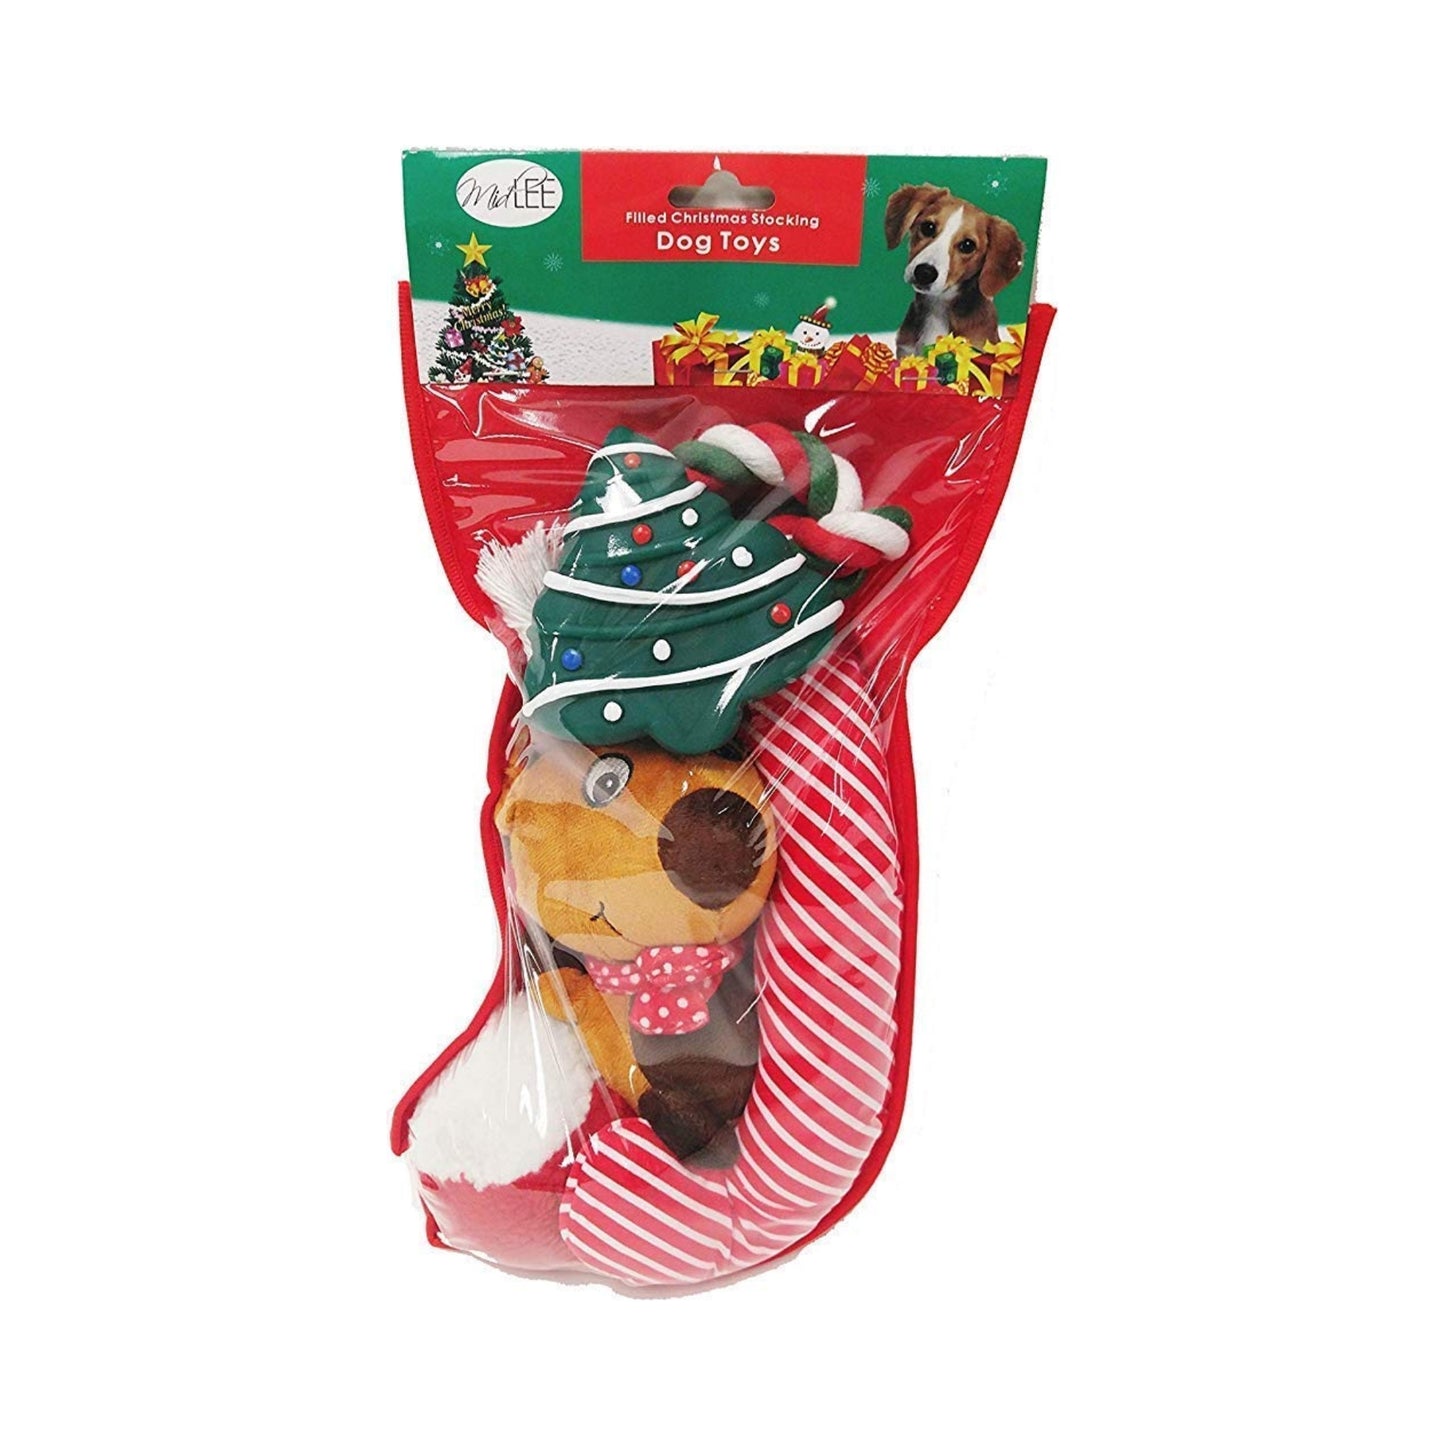 Midlee Dog Christmas Stocking Filled with Toys